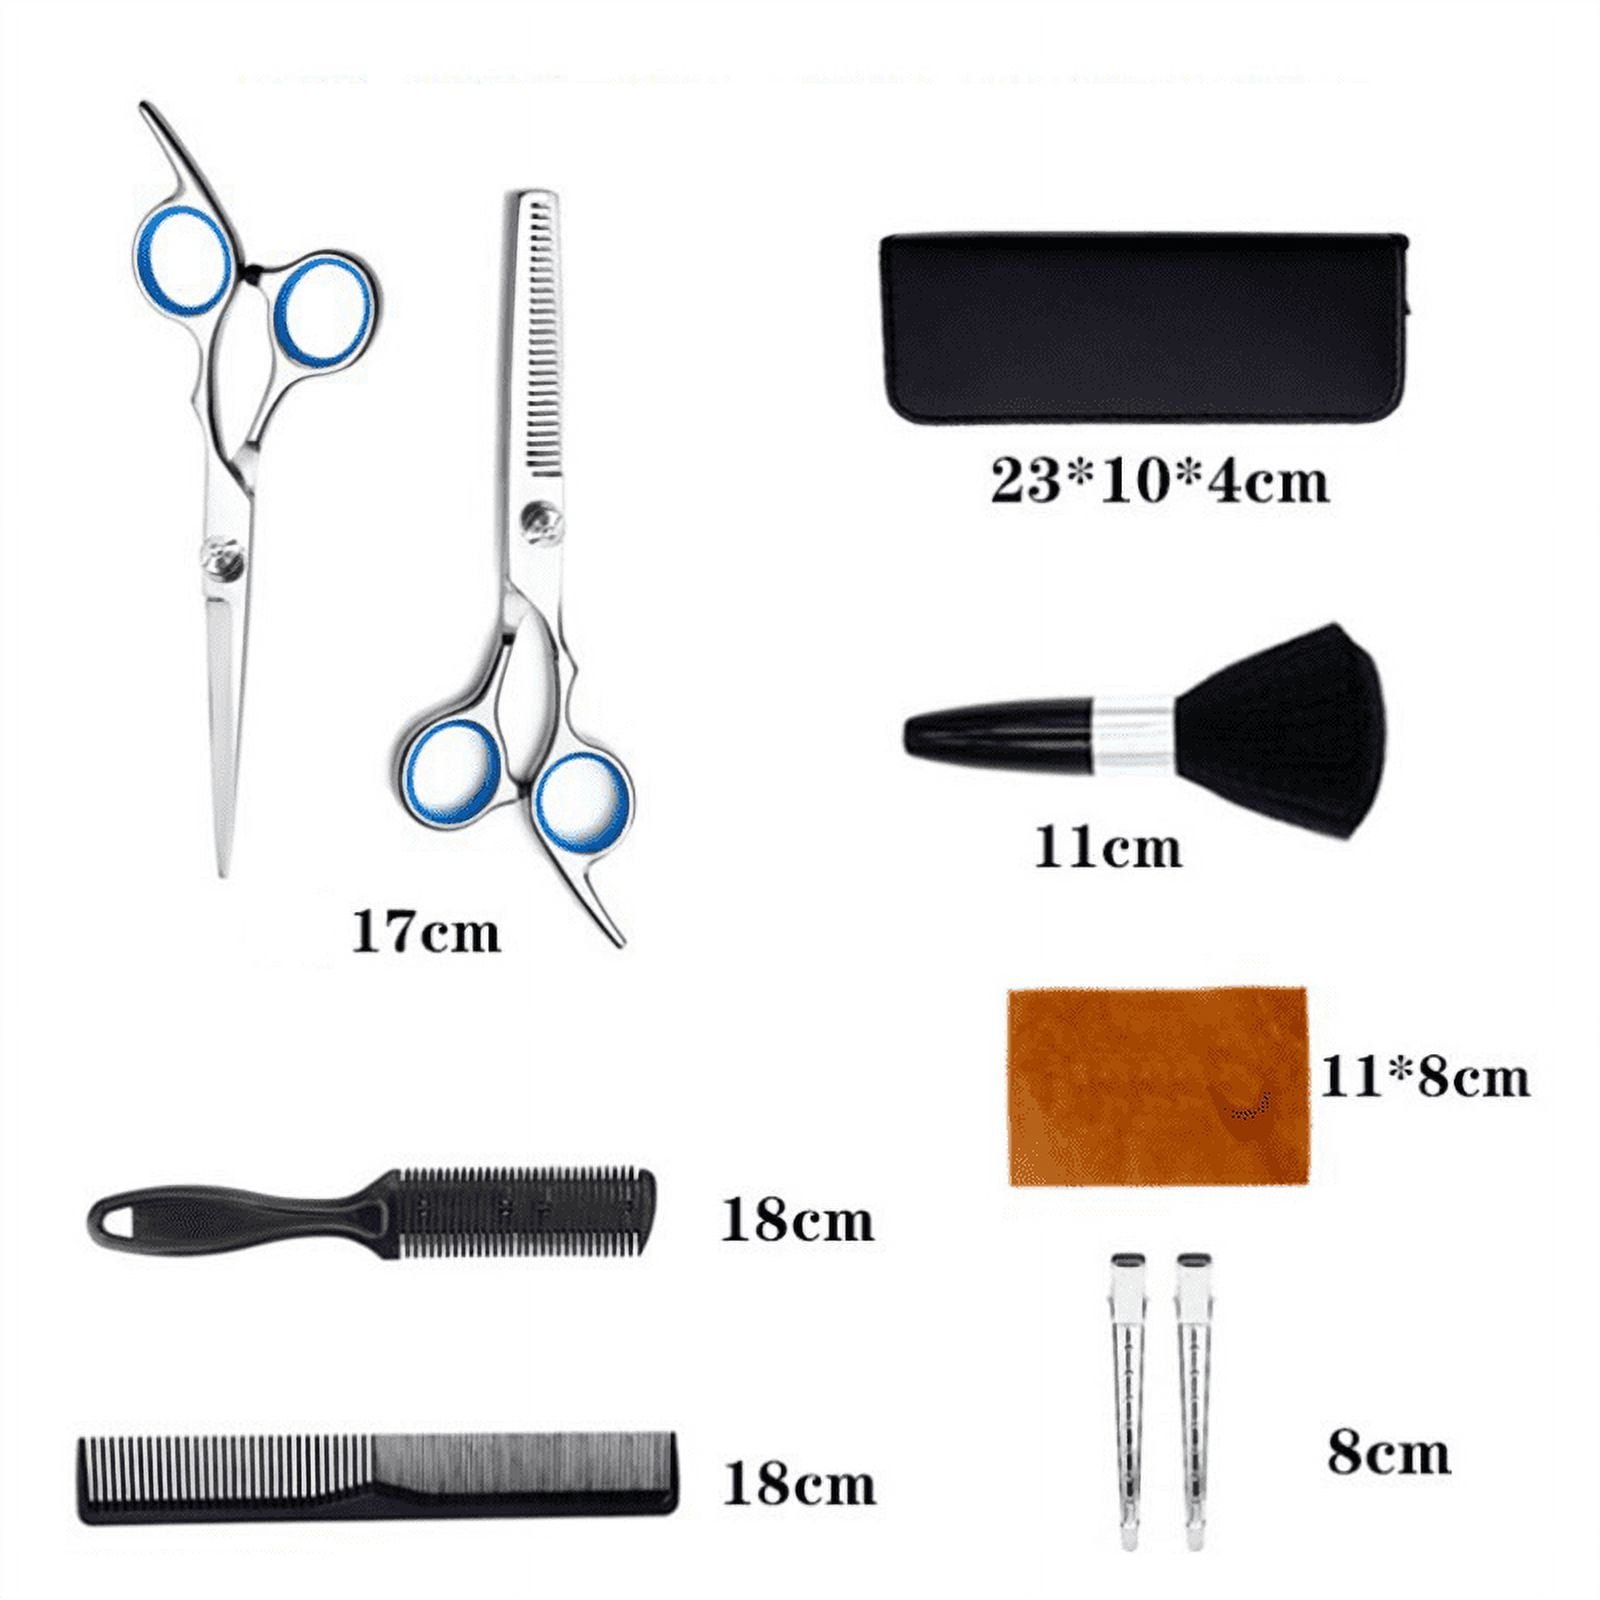 Suptree Professional Hair Cutting Scissors Tools for Women Men, 10 Pcs Haircut Kit Scissors for Cutting Hair, Size: One Set, Black